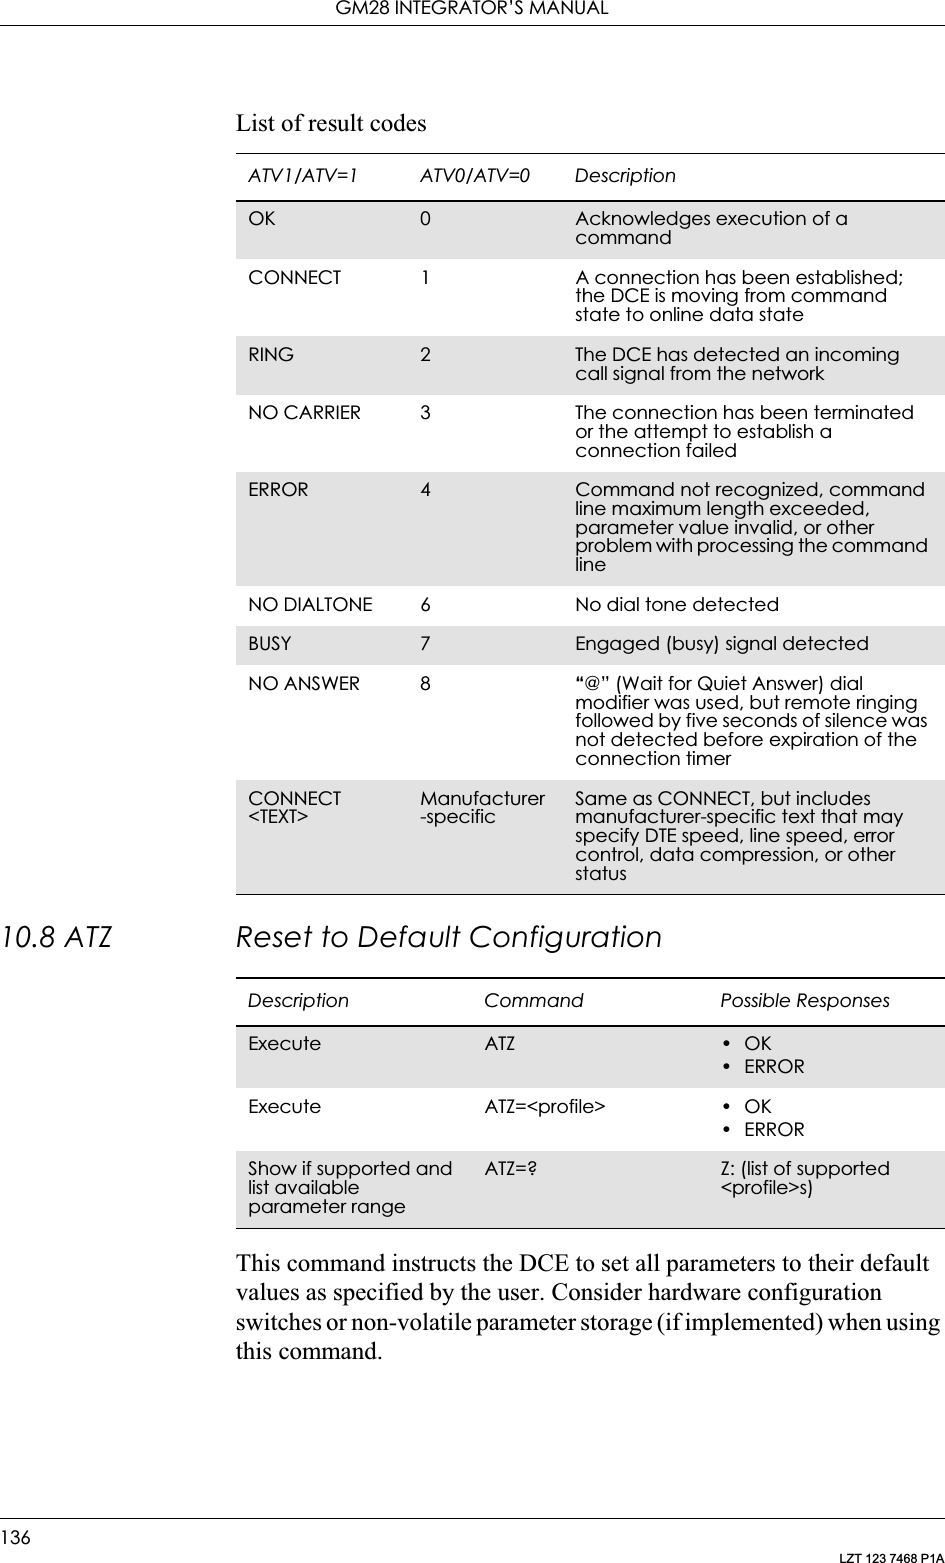 GM28 INTEGRATOR’S MANUAL136LZT 123 7468 P1AList of result codes10.8 ATZ Reset to Default ConfigurationThis command instructs the DCE to set all parameters to their default values as specified by the user. Consider hardware configuration switches or non-volatile parameter storage (if implemented) when using this command.ATV1/ATV=1 ATV0/ATV=0 DescriptionOK 0Acknowledges execution of a commandCONNECT 1 A connection has been established; the DCE is moving from command state to online data stateRING 2The DCE has detected an incoming call signal from the networkNO CARRIER 3 The connection has been terminated or the attempt to establish a connection failedERROR 4Command not recognized, command line maximum length exceeded, parameter value invalid, or other problem with processing the command lineNO DIALTONE 6 No dial tone detectedBUSY 7Engaged (busy) signal detectedNO ANSWER 8 “@” (Wait for Quiet Answer) dial modifier was used, but remote ringing followed by five seconds of silence was not detected before expiration of the connection timerCONNECT &lt;TEXT&gt;Manufacturer-specificSame as CONNECT, but includes manufacturer-specific text that may specify DTE speed, line speed, error control, data compression, or other statusDescription Command Possible ResponsesExecute ATZ •OK•ERRORExecute ATZ=&lt;profile&gt; • OK•ERRORShow if supported and list available parameter rangeATZ=? Z: (list of supported &lt;profile&gt;s)